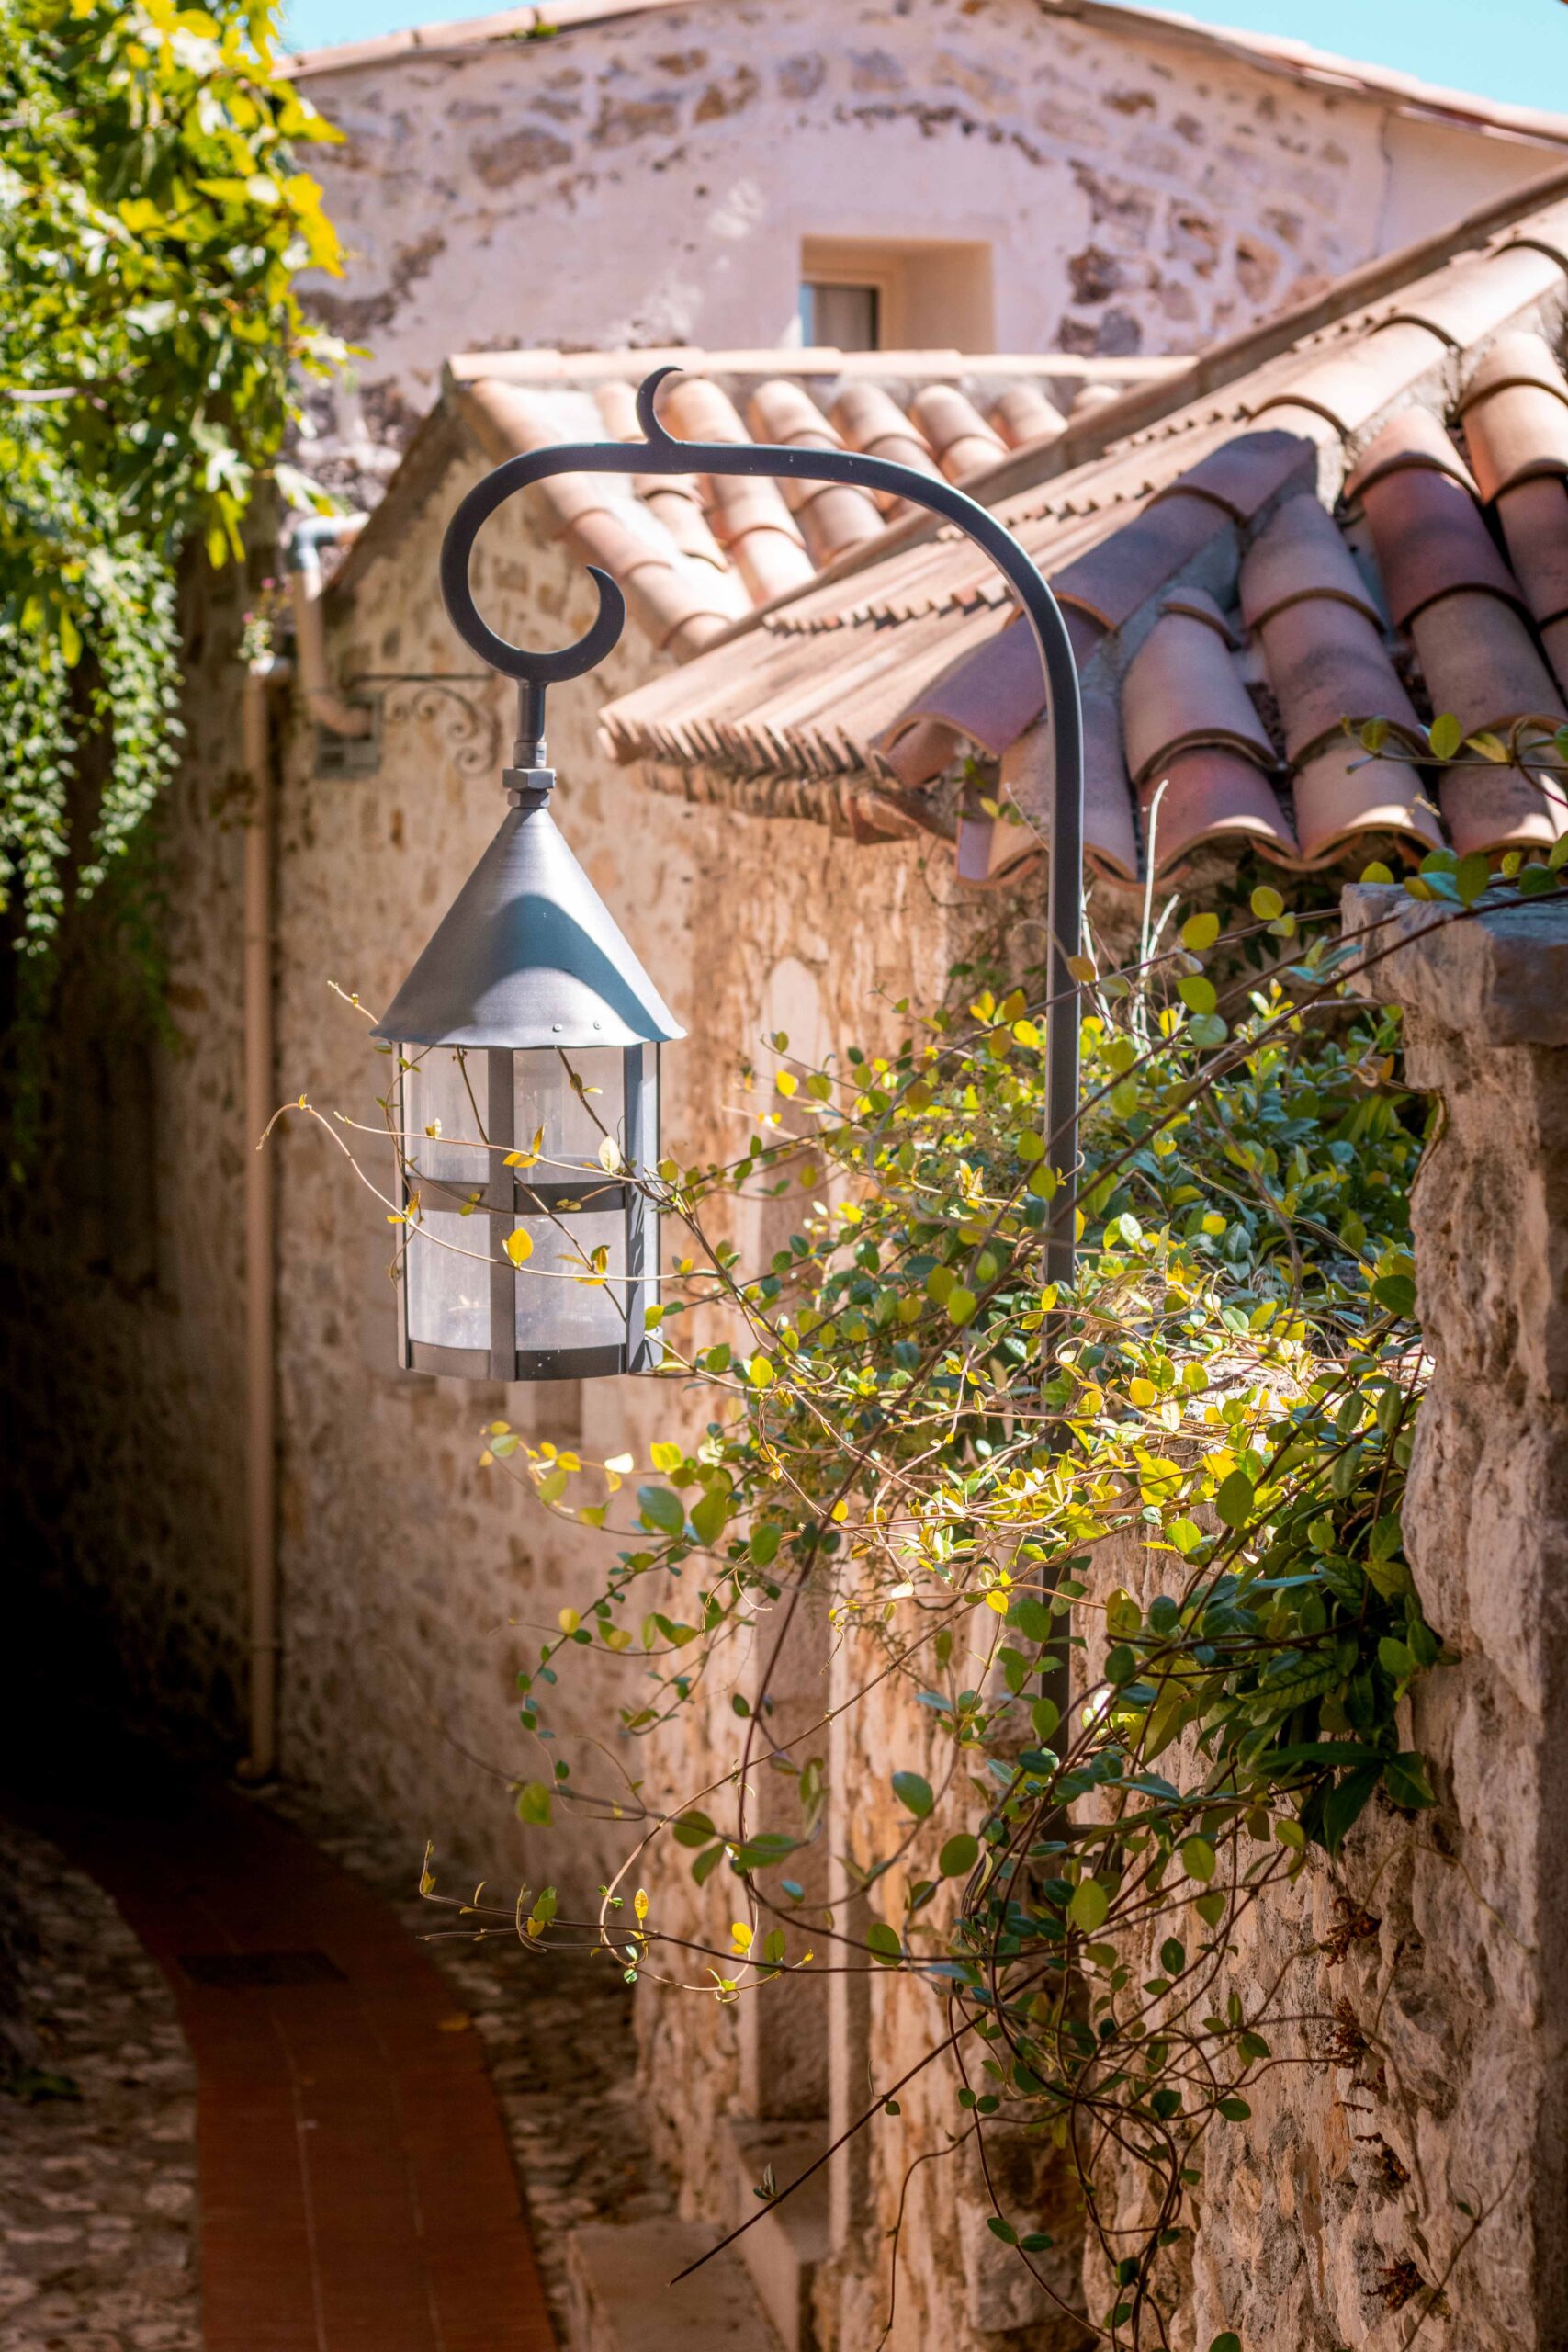 Detail of a lantern and plants in a small cobblestone street in Eze Village, France